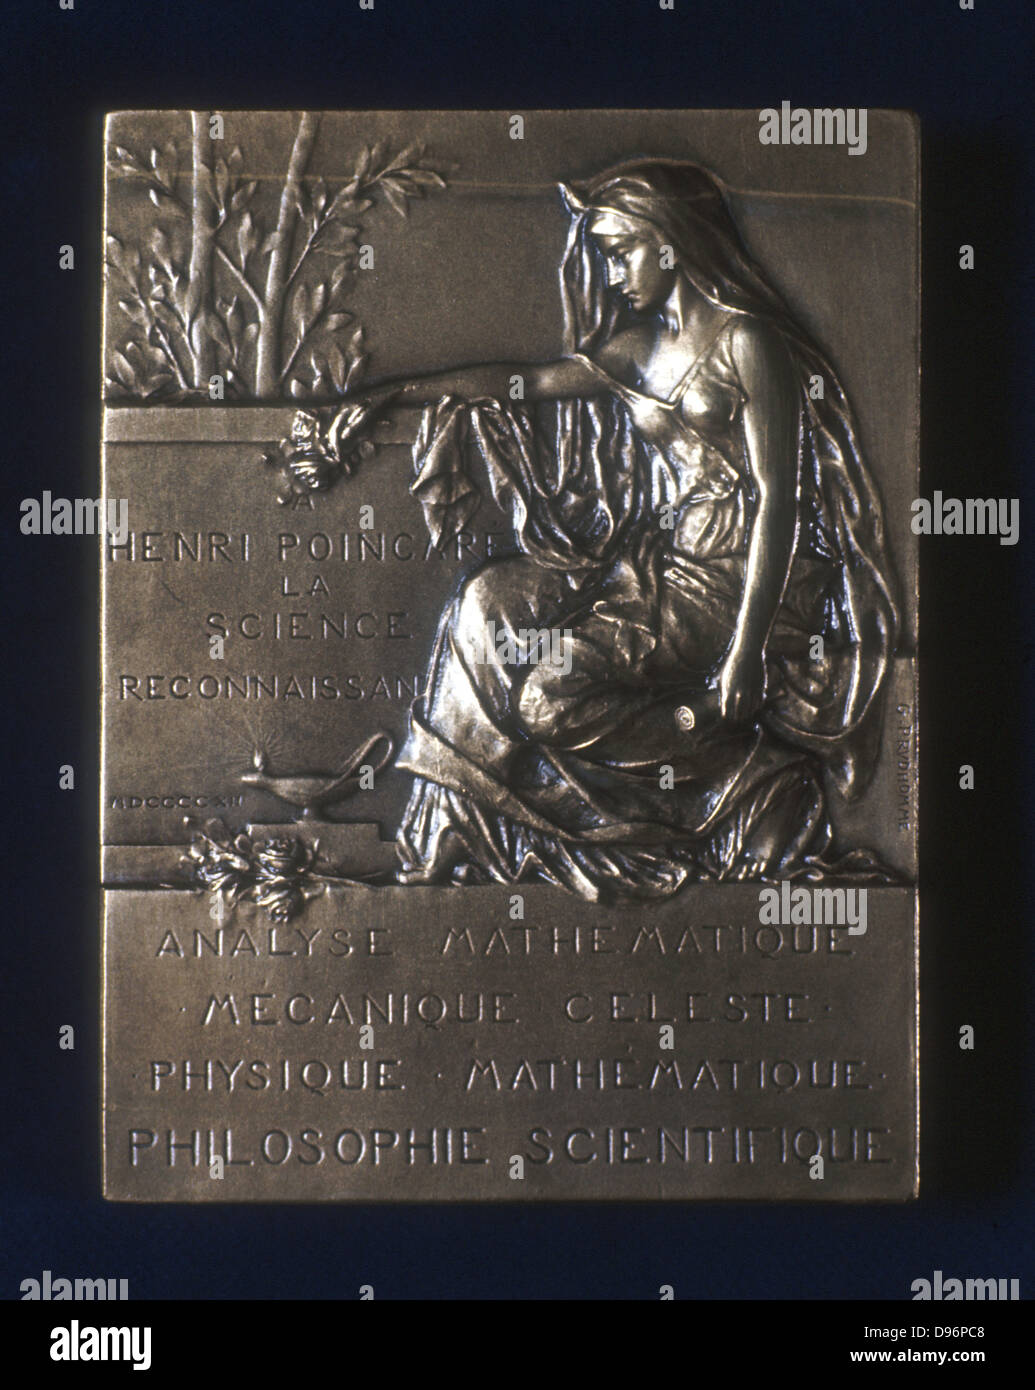 Plaquette commemorating the death of Henri Poincare, French mathematician and philosopher, 1912. Poincare (1854-1912) is best remembered for his work on topology and celestial mechanics. Stock Photo